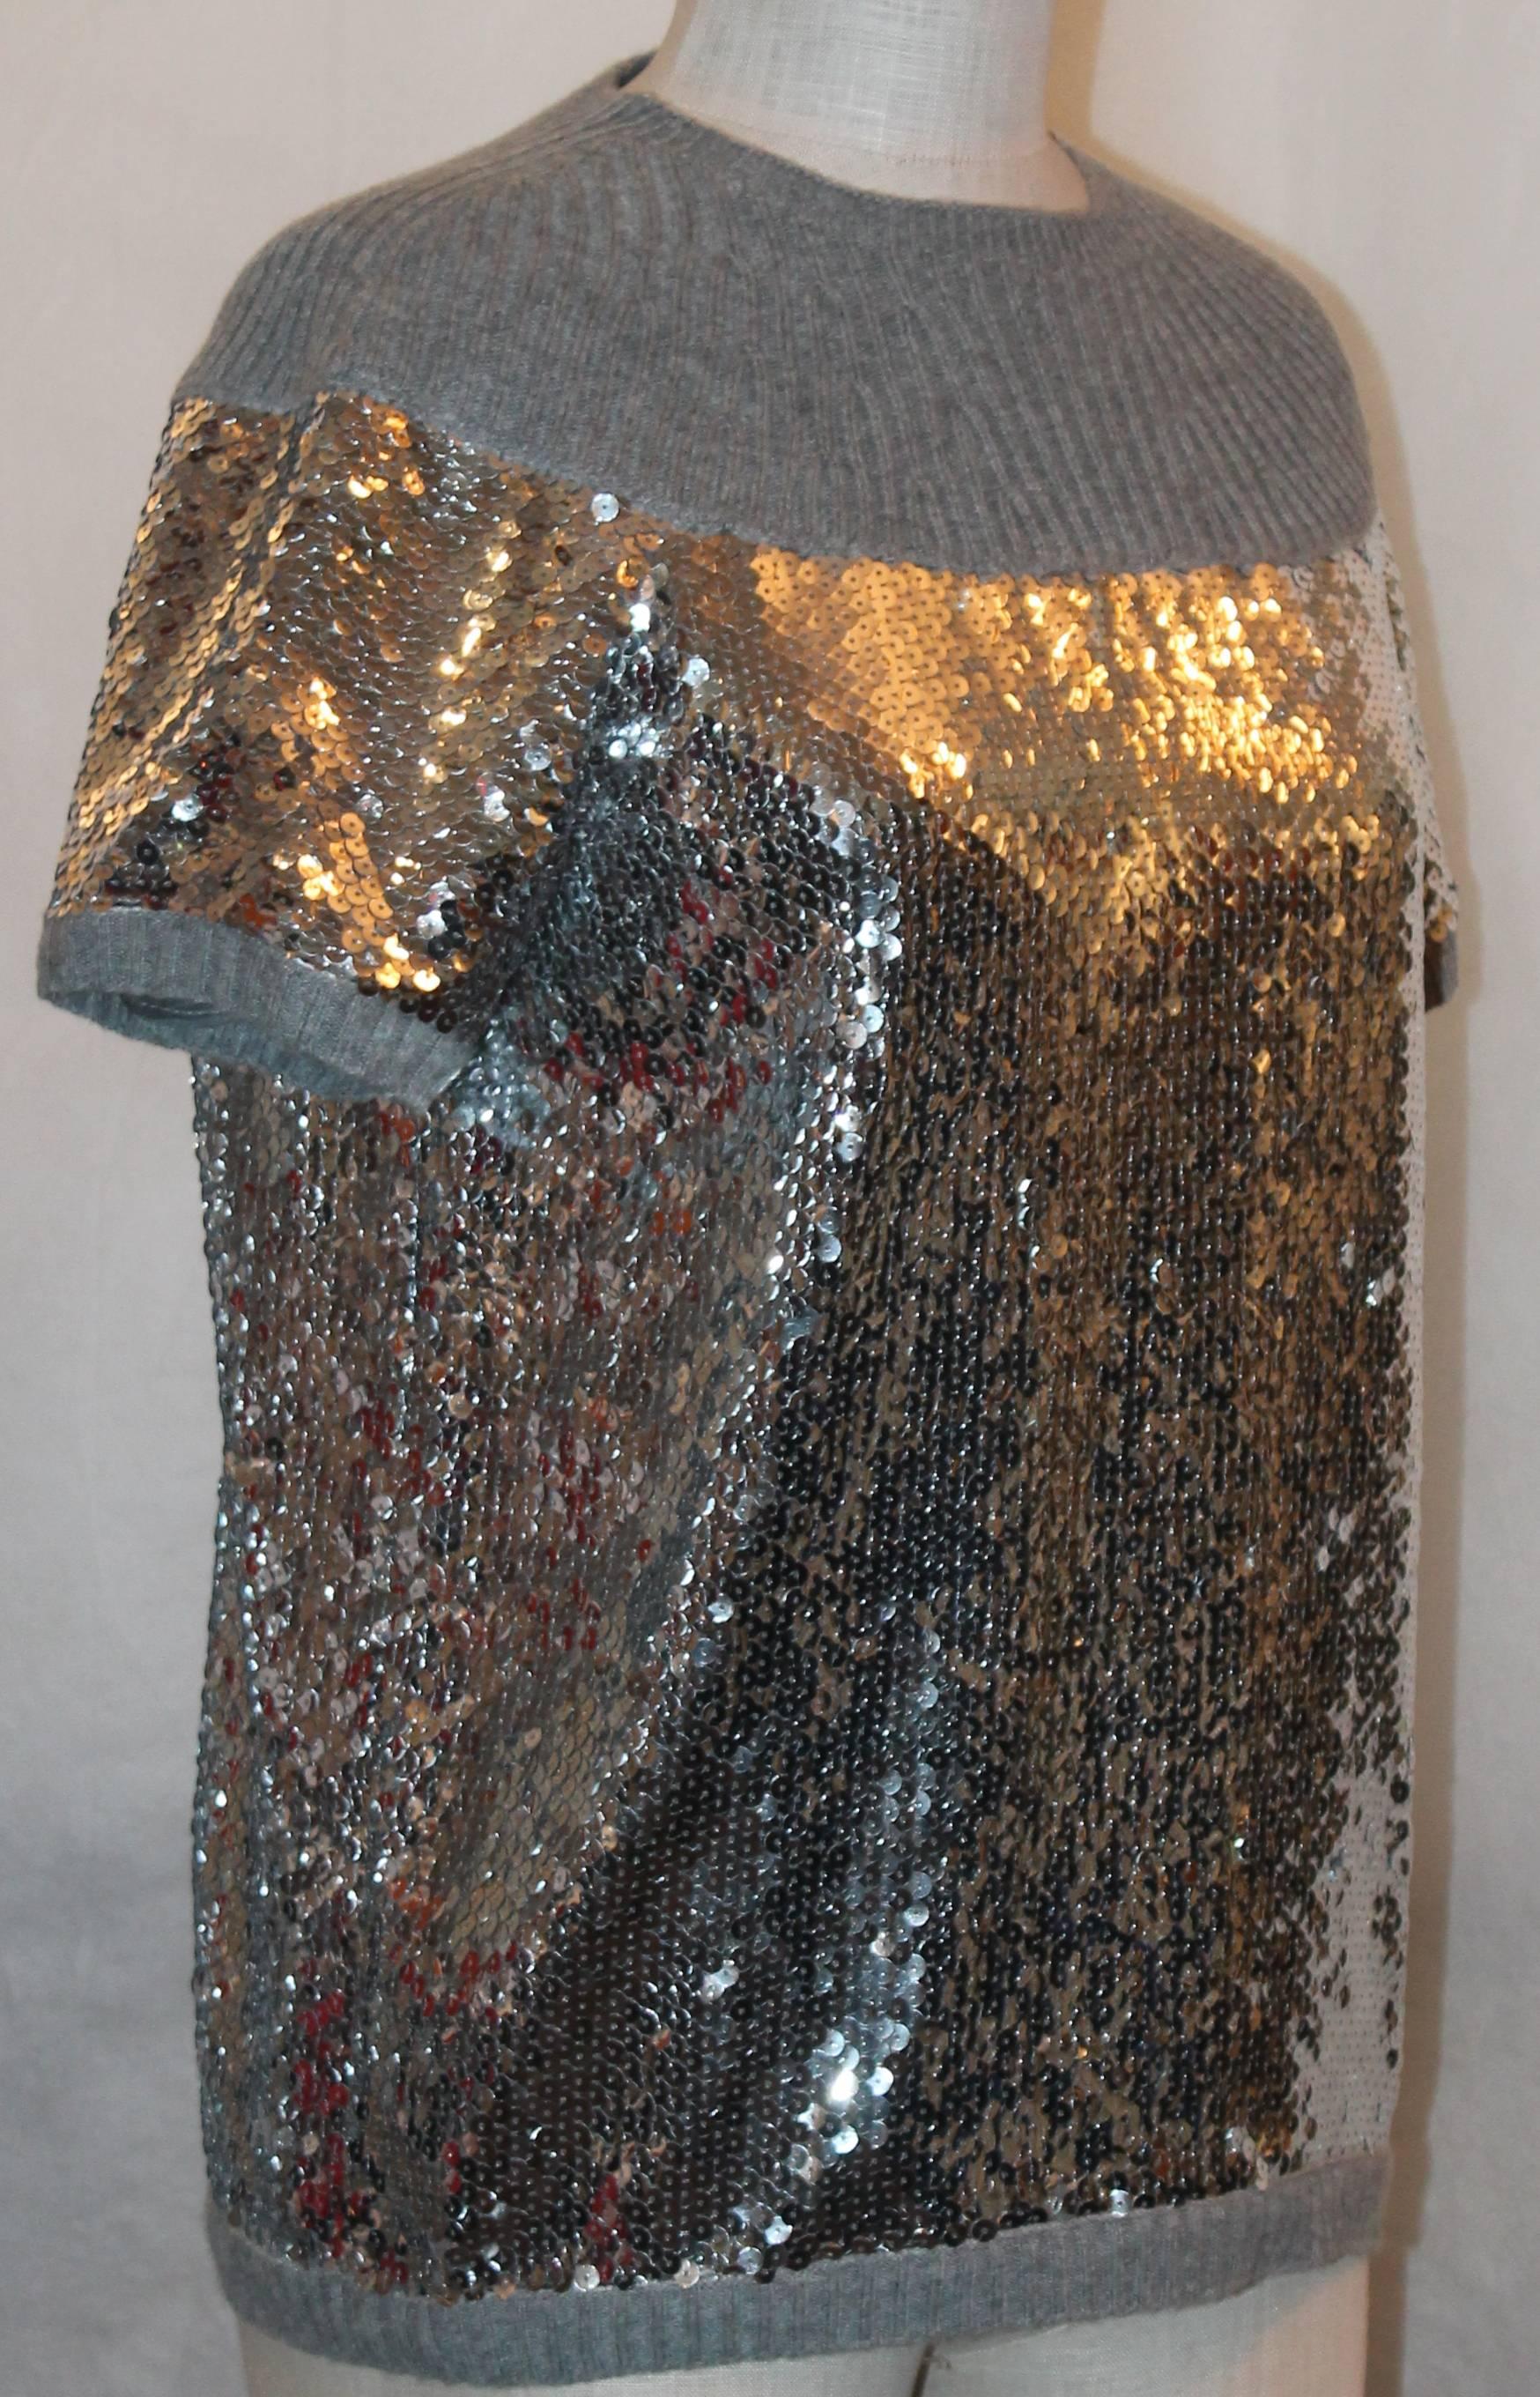 Chanel Grey Cashmere & Silver Sequin Top - 40.  This beautiful top has a cashmere neck and trims.  It has full sequins from the bust to the bottom.  It has a dark rhinestone 